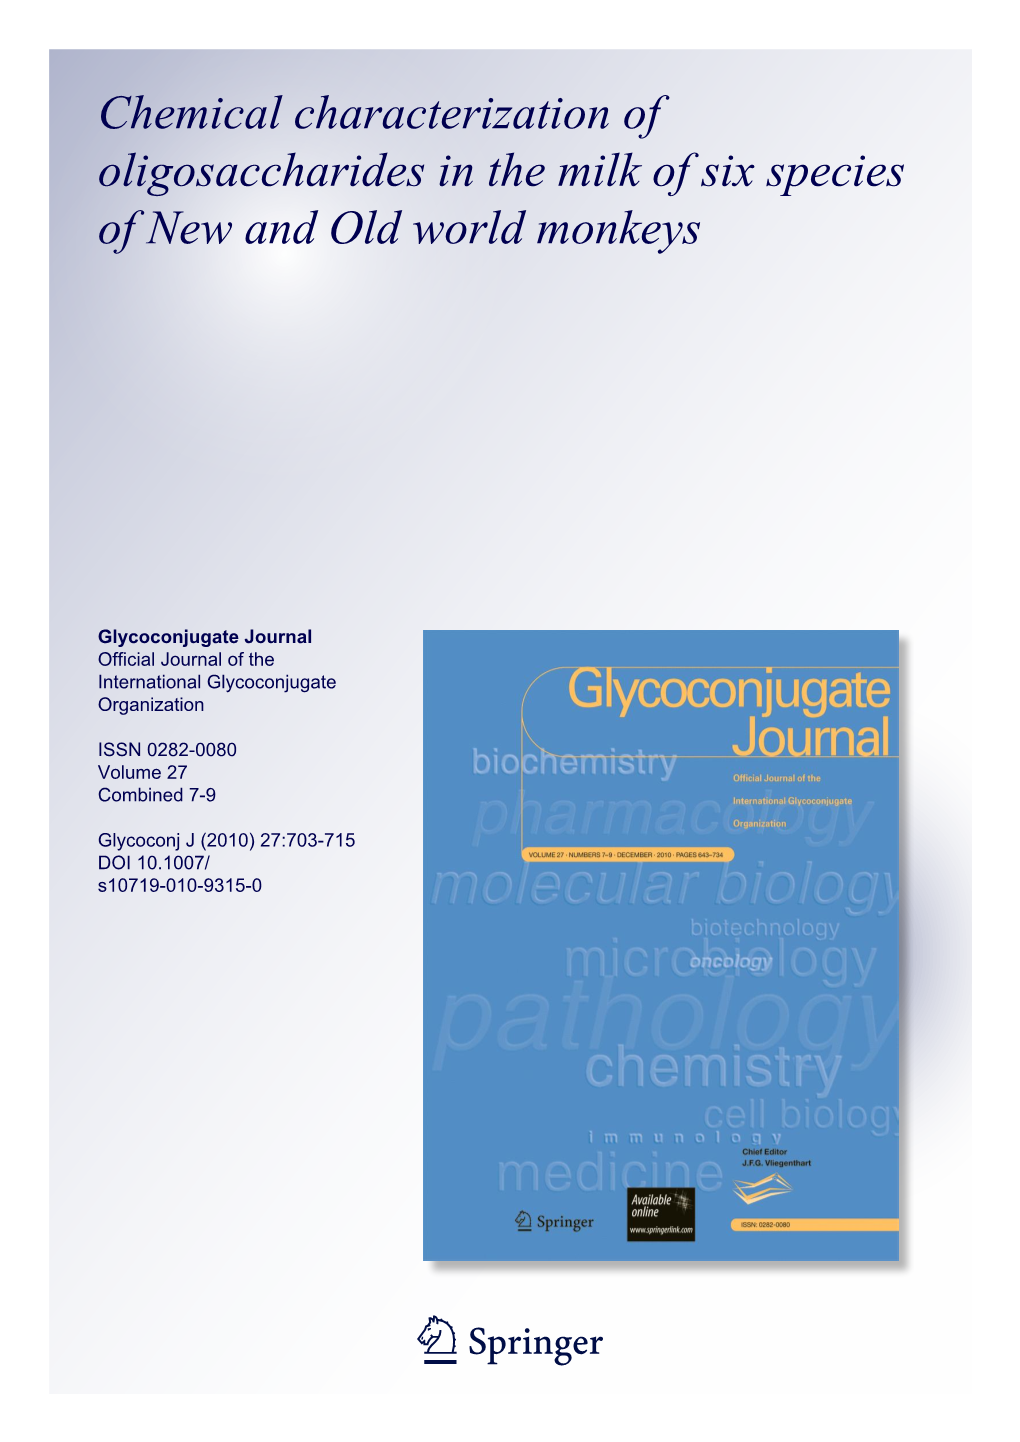 Chemical Characterization of Oligosaccharides in the Milk of Six Species of New and Old World Monkeys